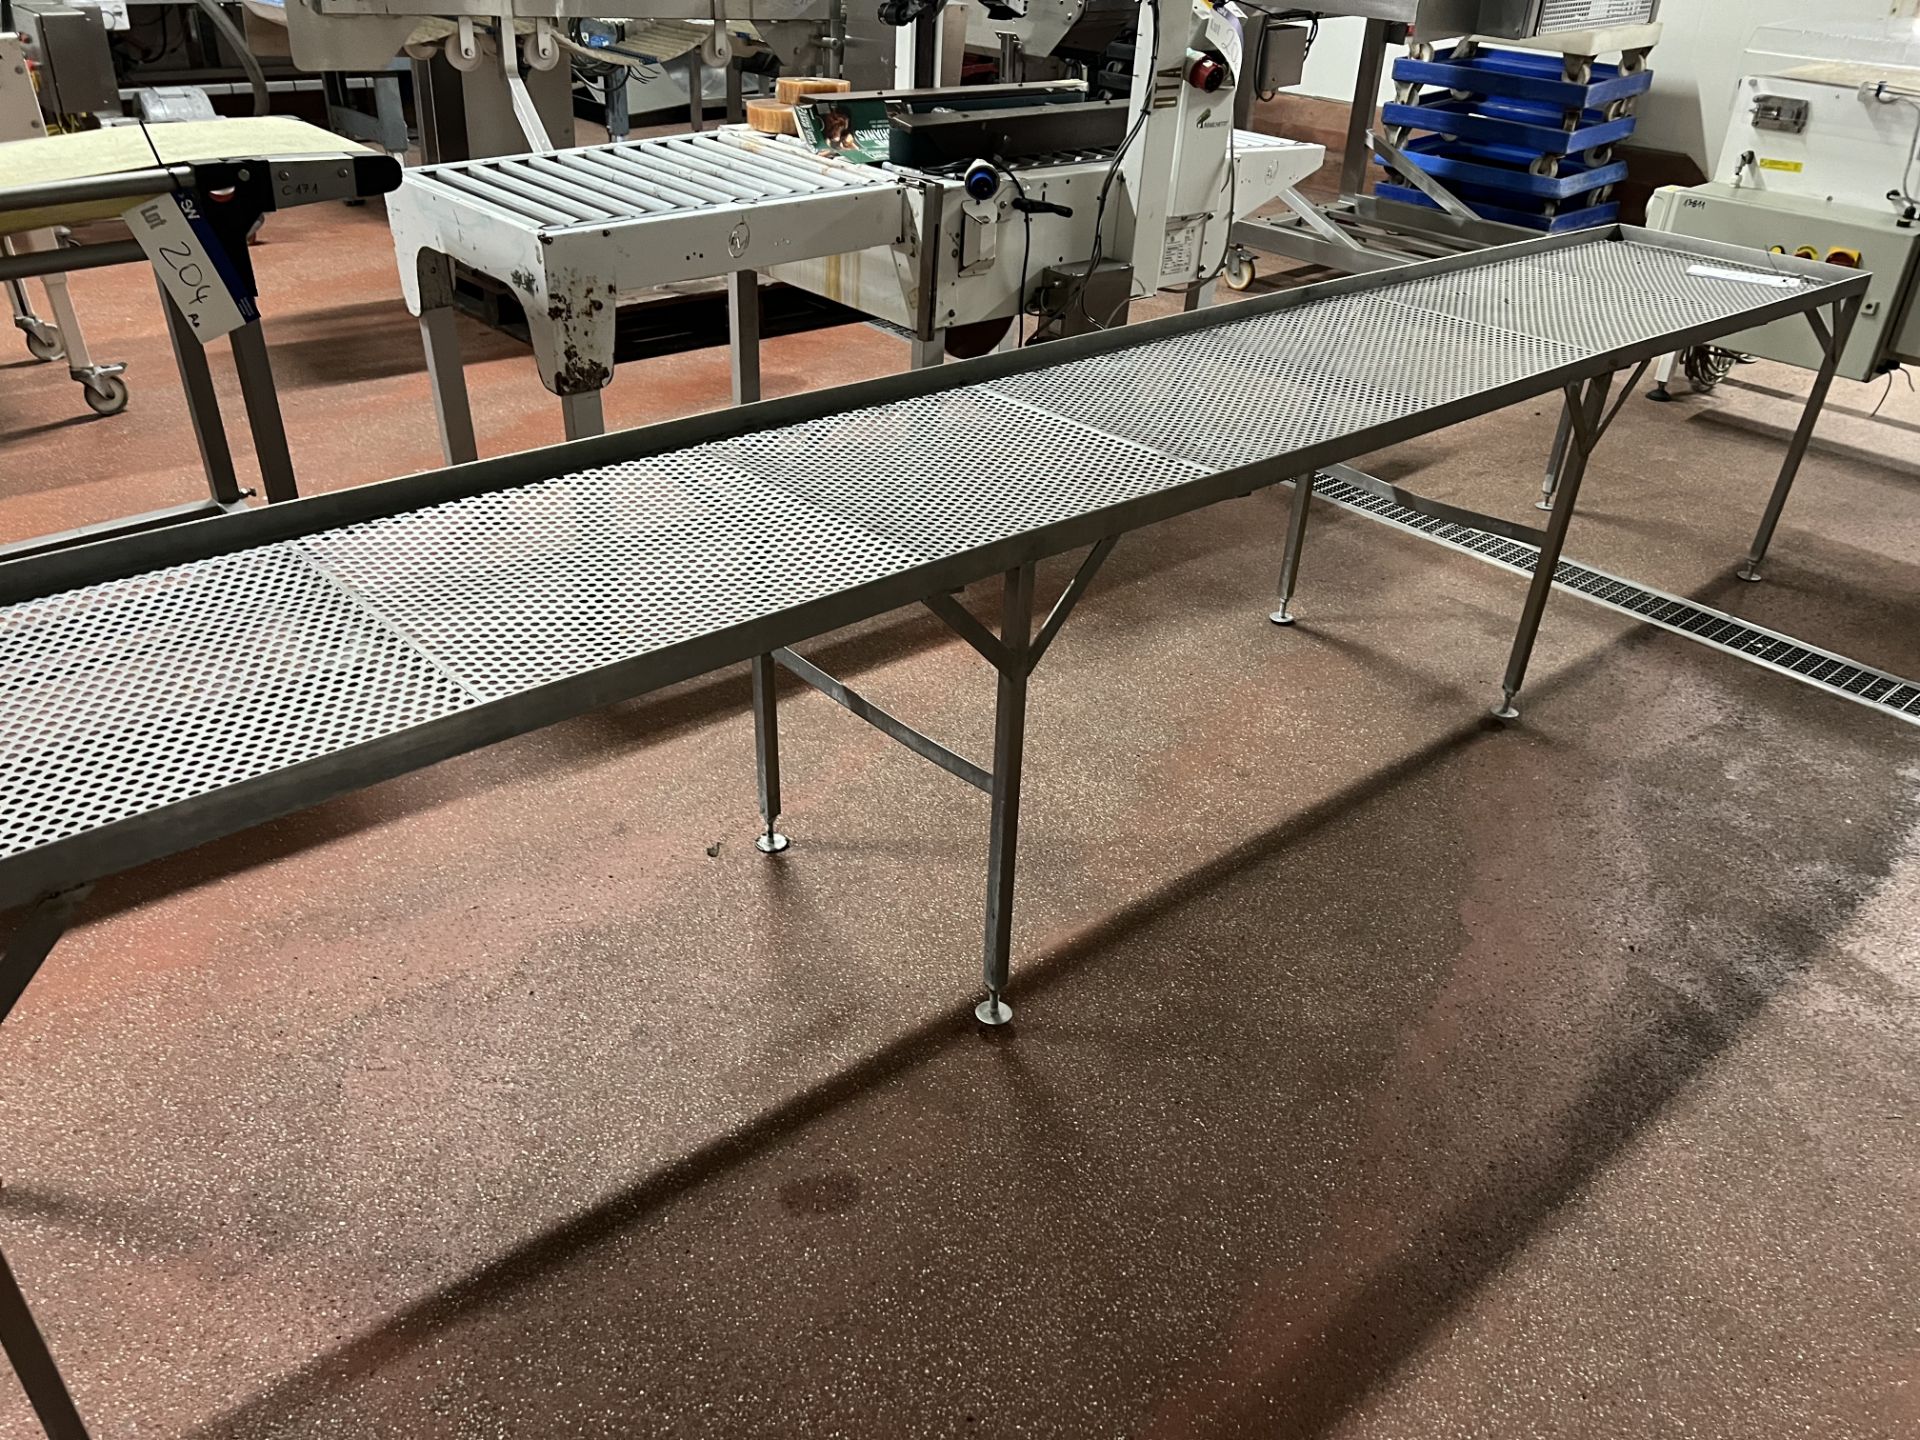 Perforated Bench /Table, approx. 3.5m x 0.55m x 0.7m high, , lift out charge - £30 + VAT, lot - Image 2 of 2